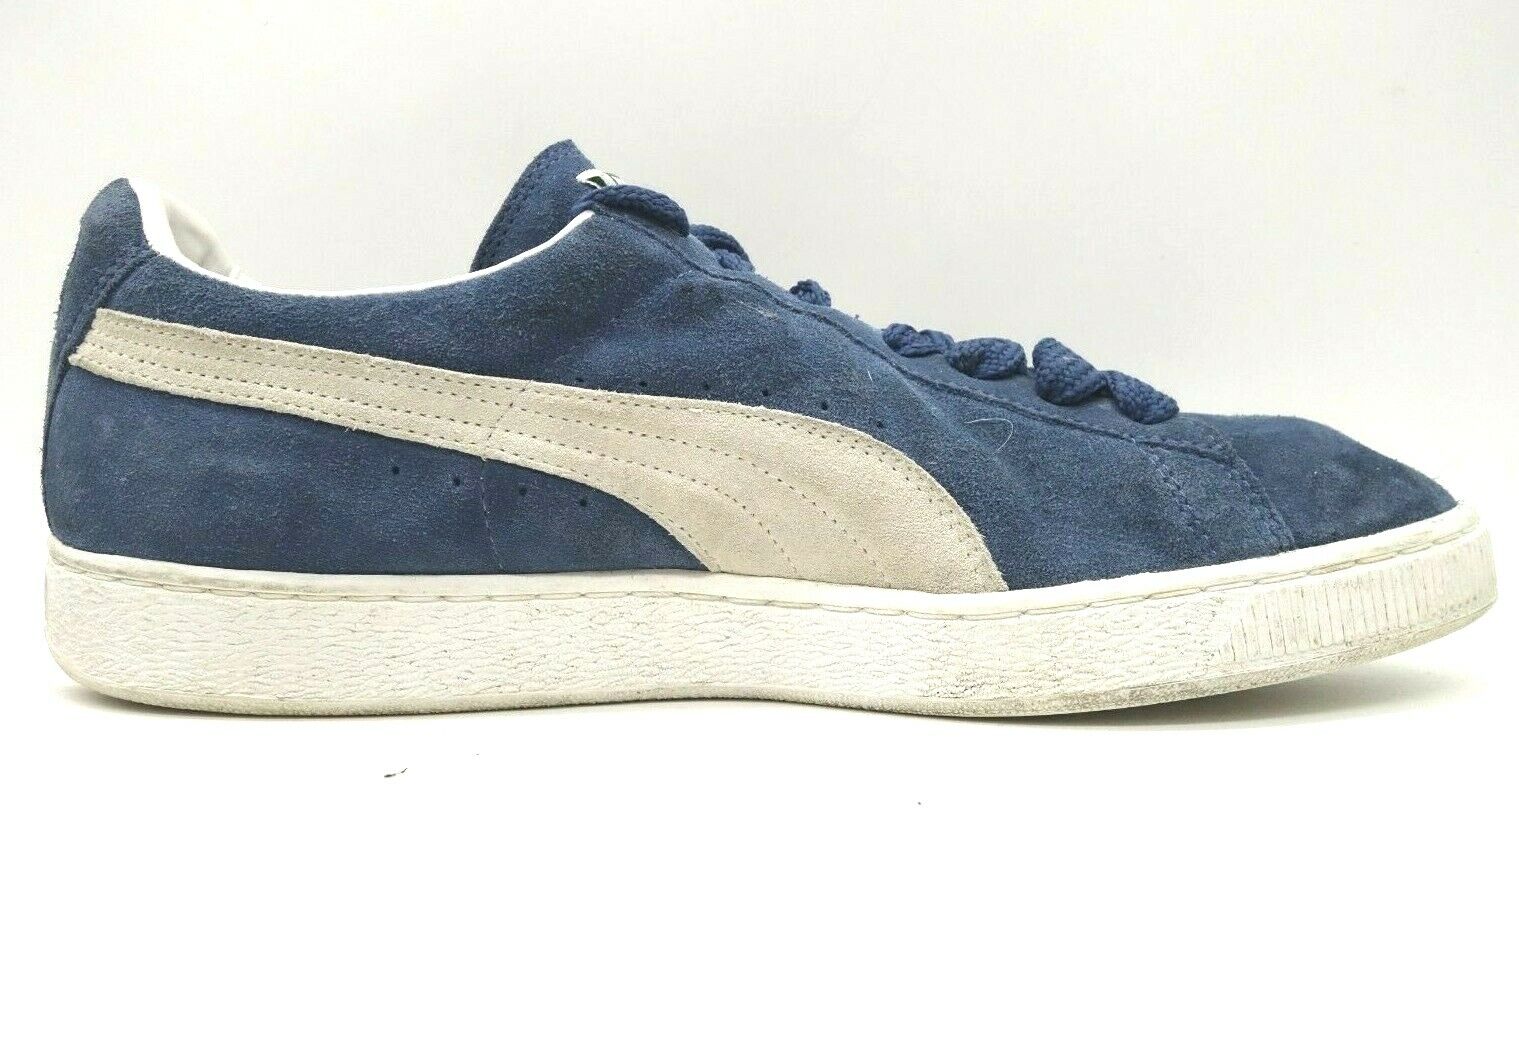 Puma Suede Logo Blue Lace Up Casual Sneakers Men#039;s Las Vegas Mall Shoes 13 2021 spring and summer new